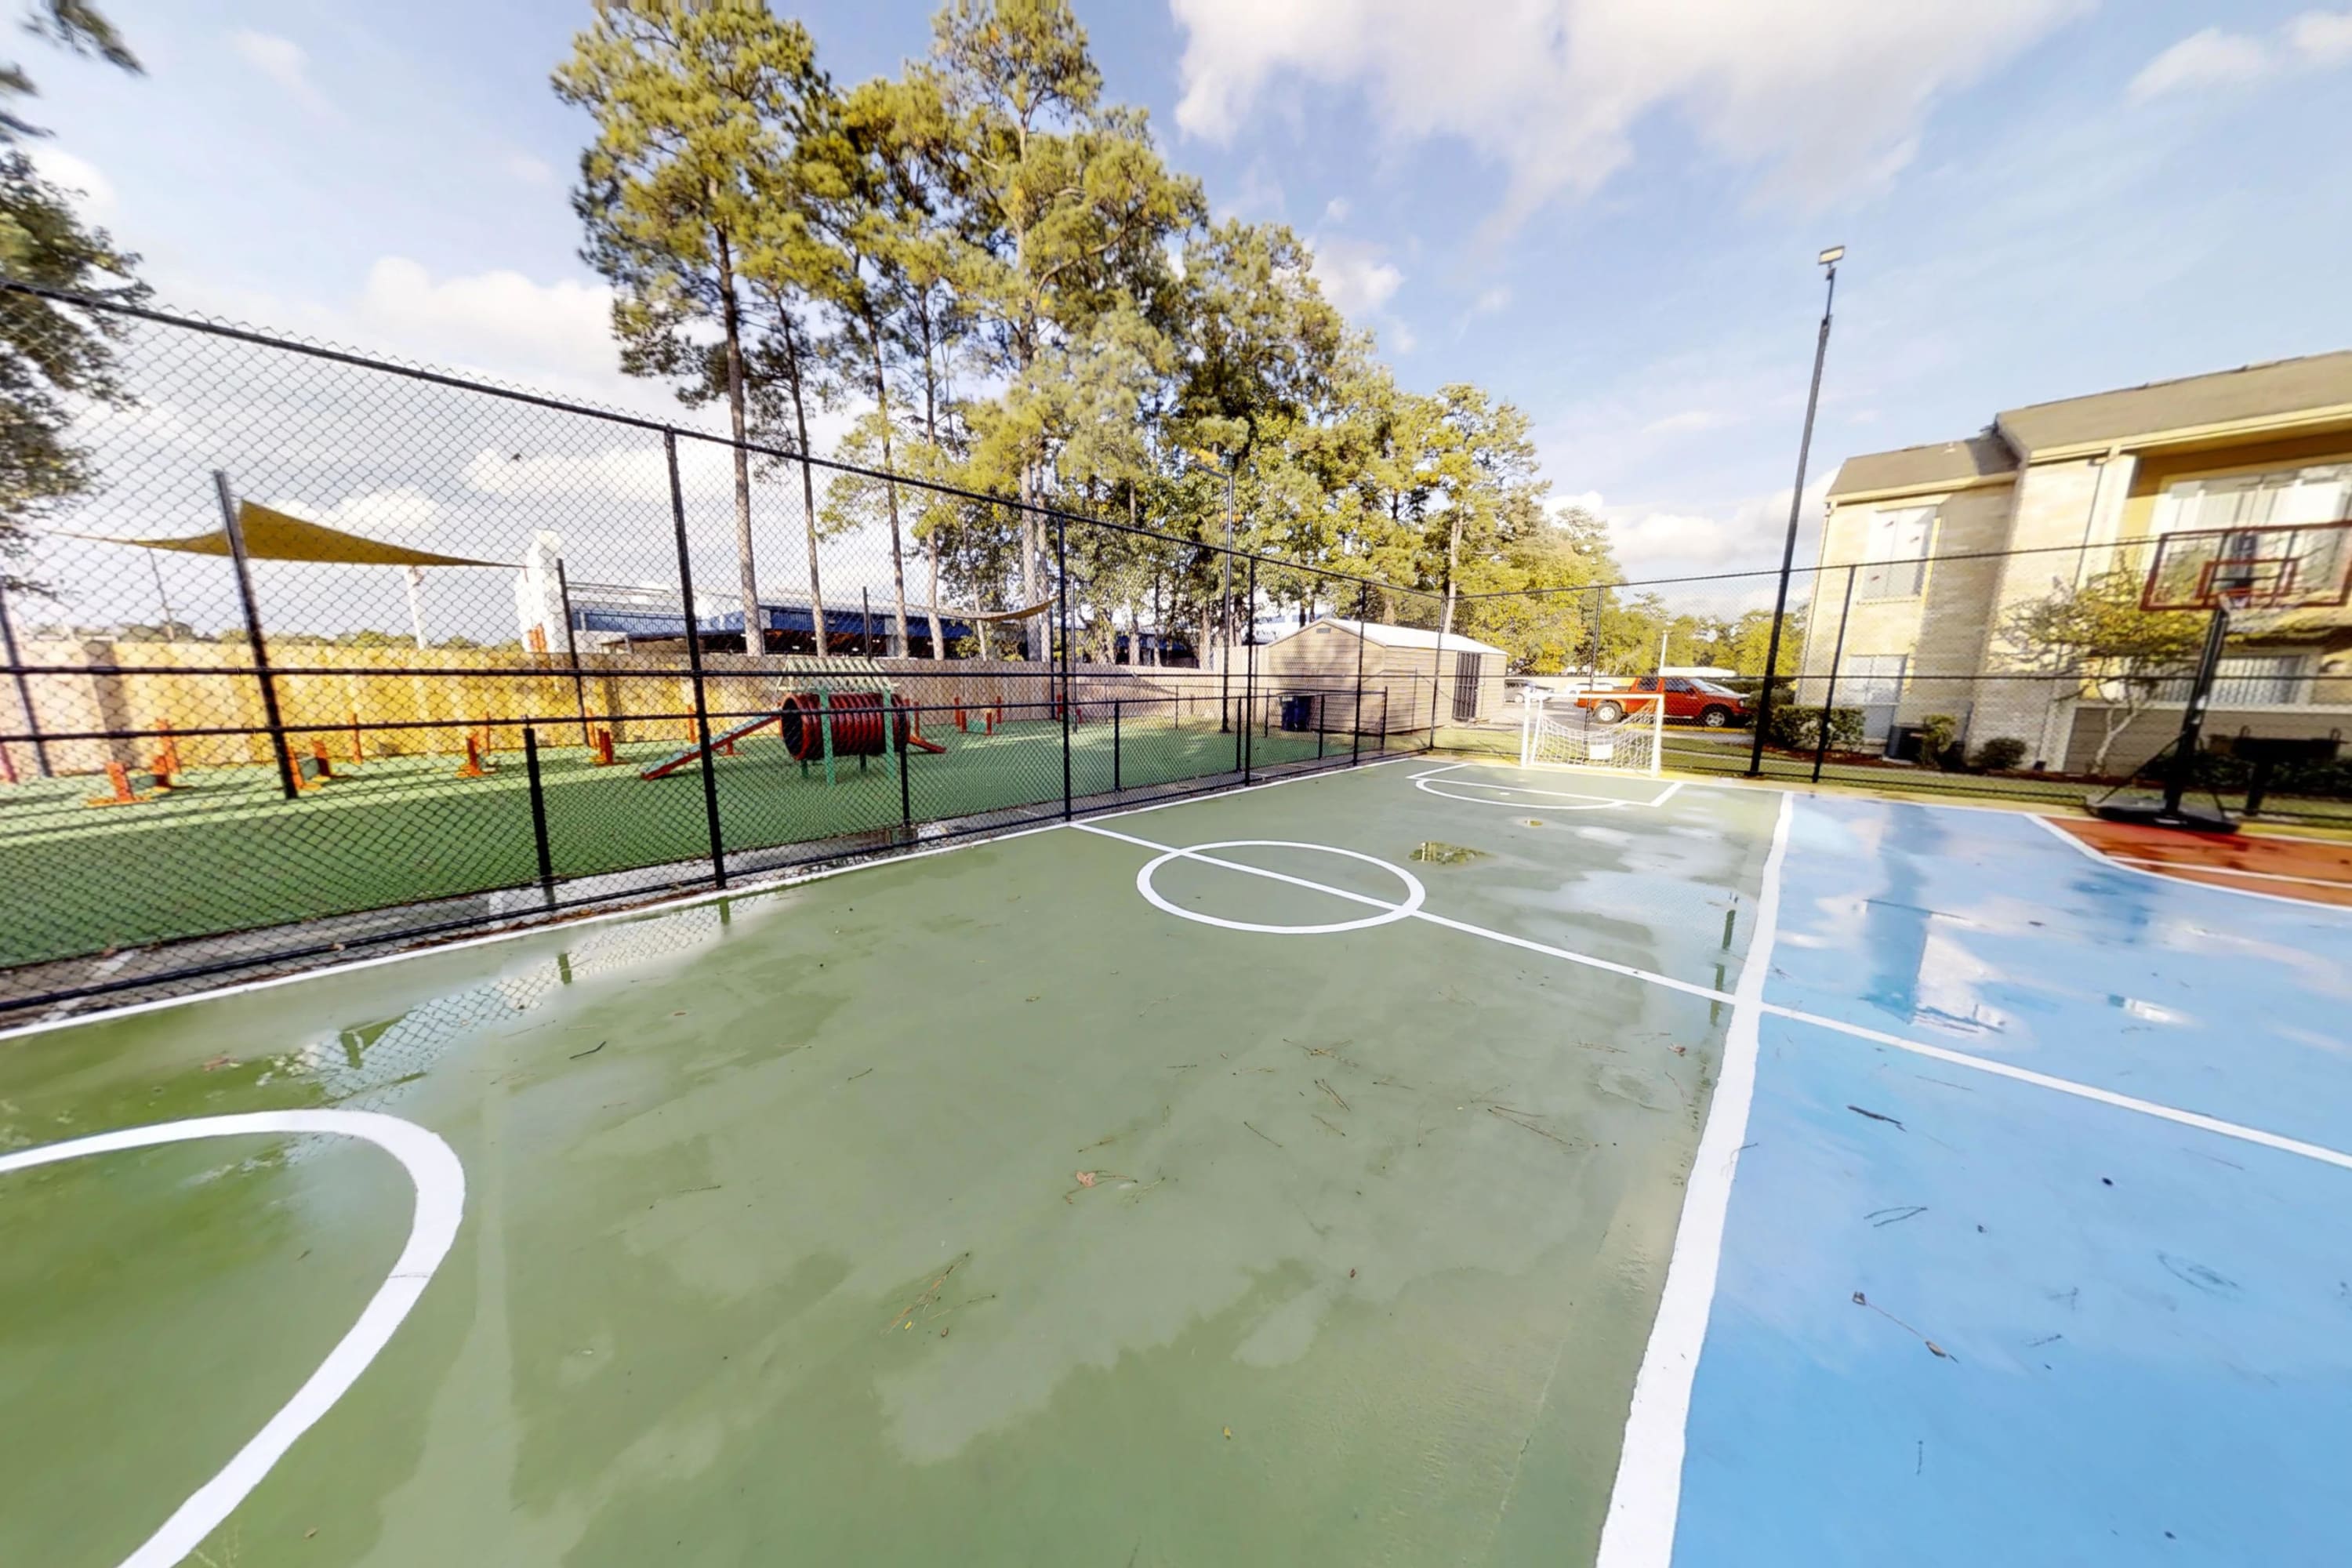 Simple Apartments With Basketball Courts Houston 